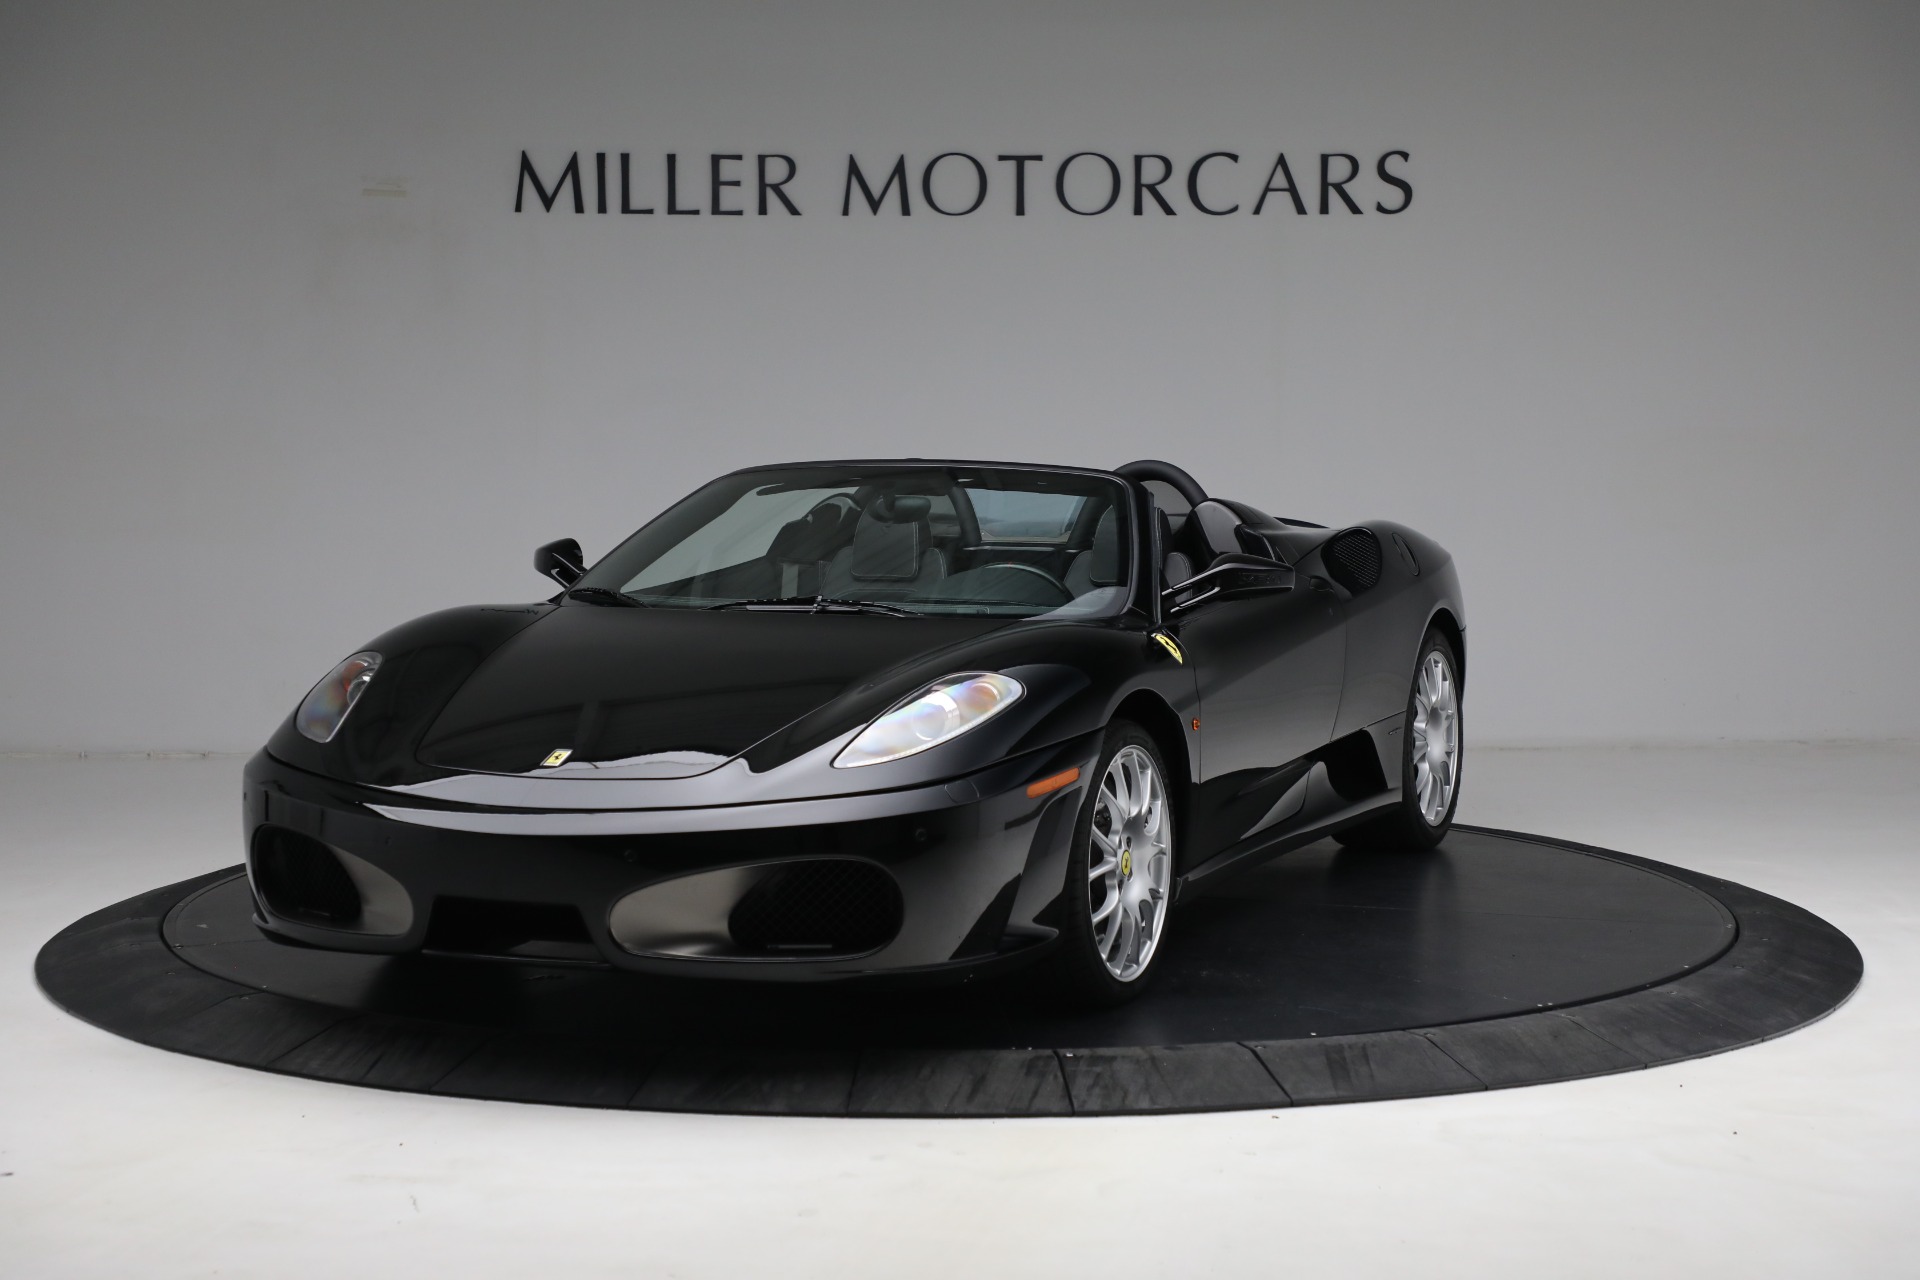 Used 2008 Ferrari F430 Spider for sale Sold at Aston Martin of Greenwich in Greenwich CT 06830 1